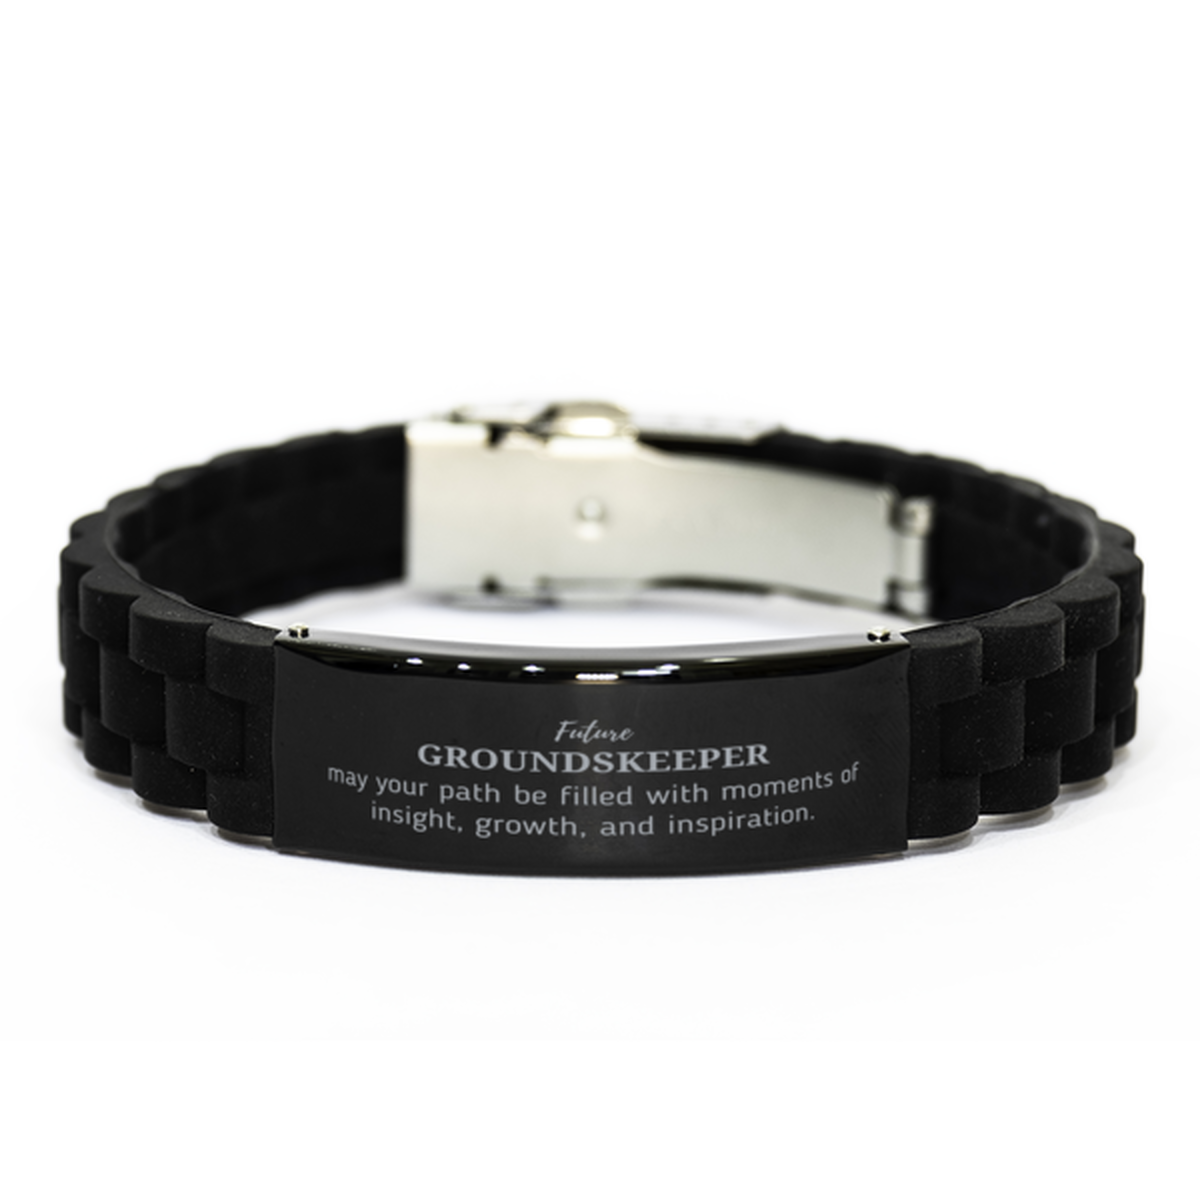 Future Groundskeeper Gifts, May your path be filled with moments of insight, Graduation Gifts for New Groundskeeper, Christmas Unique Black Glidelock Clasp Bracelet For Men, Women, Friends